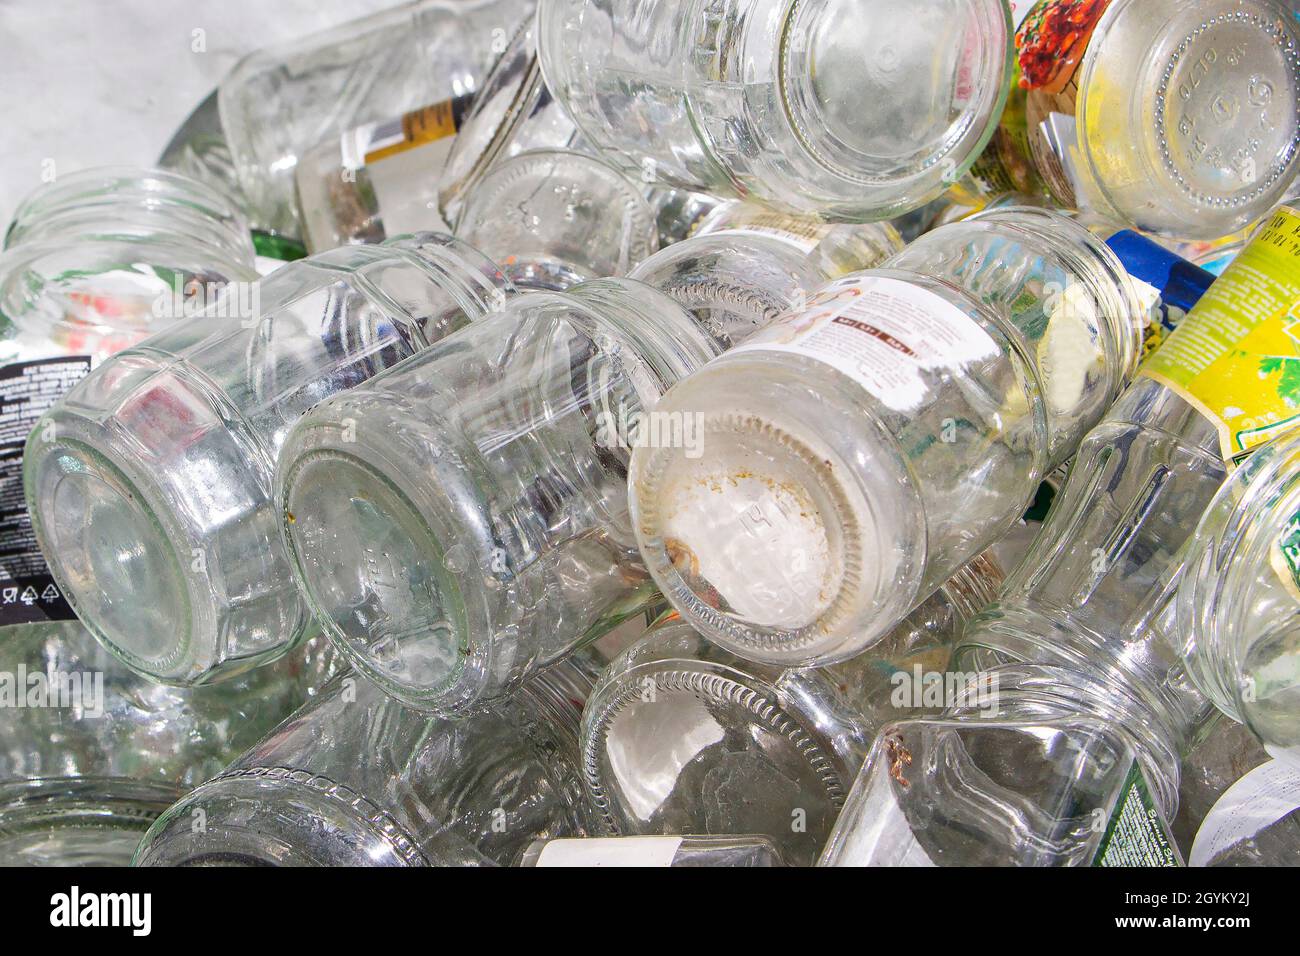 Glass Jars Collected For Recycling Environmental Protection 2GYKY2J 